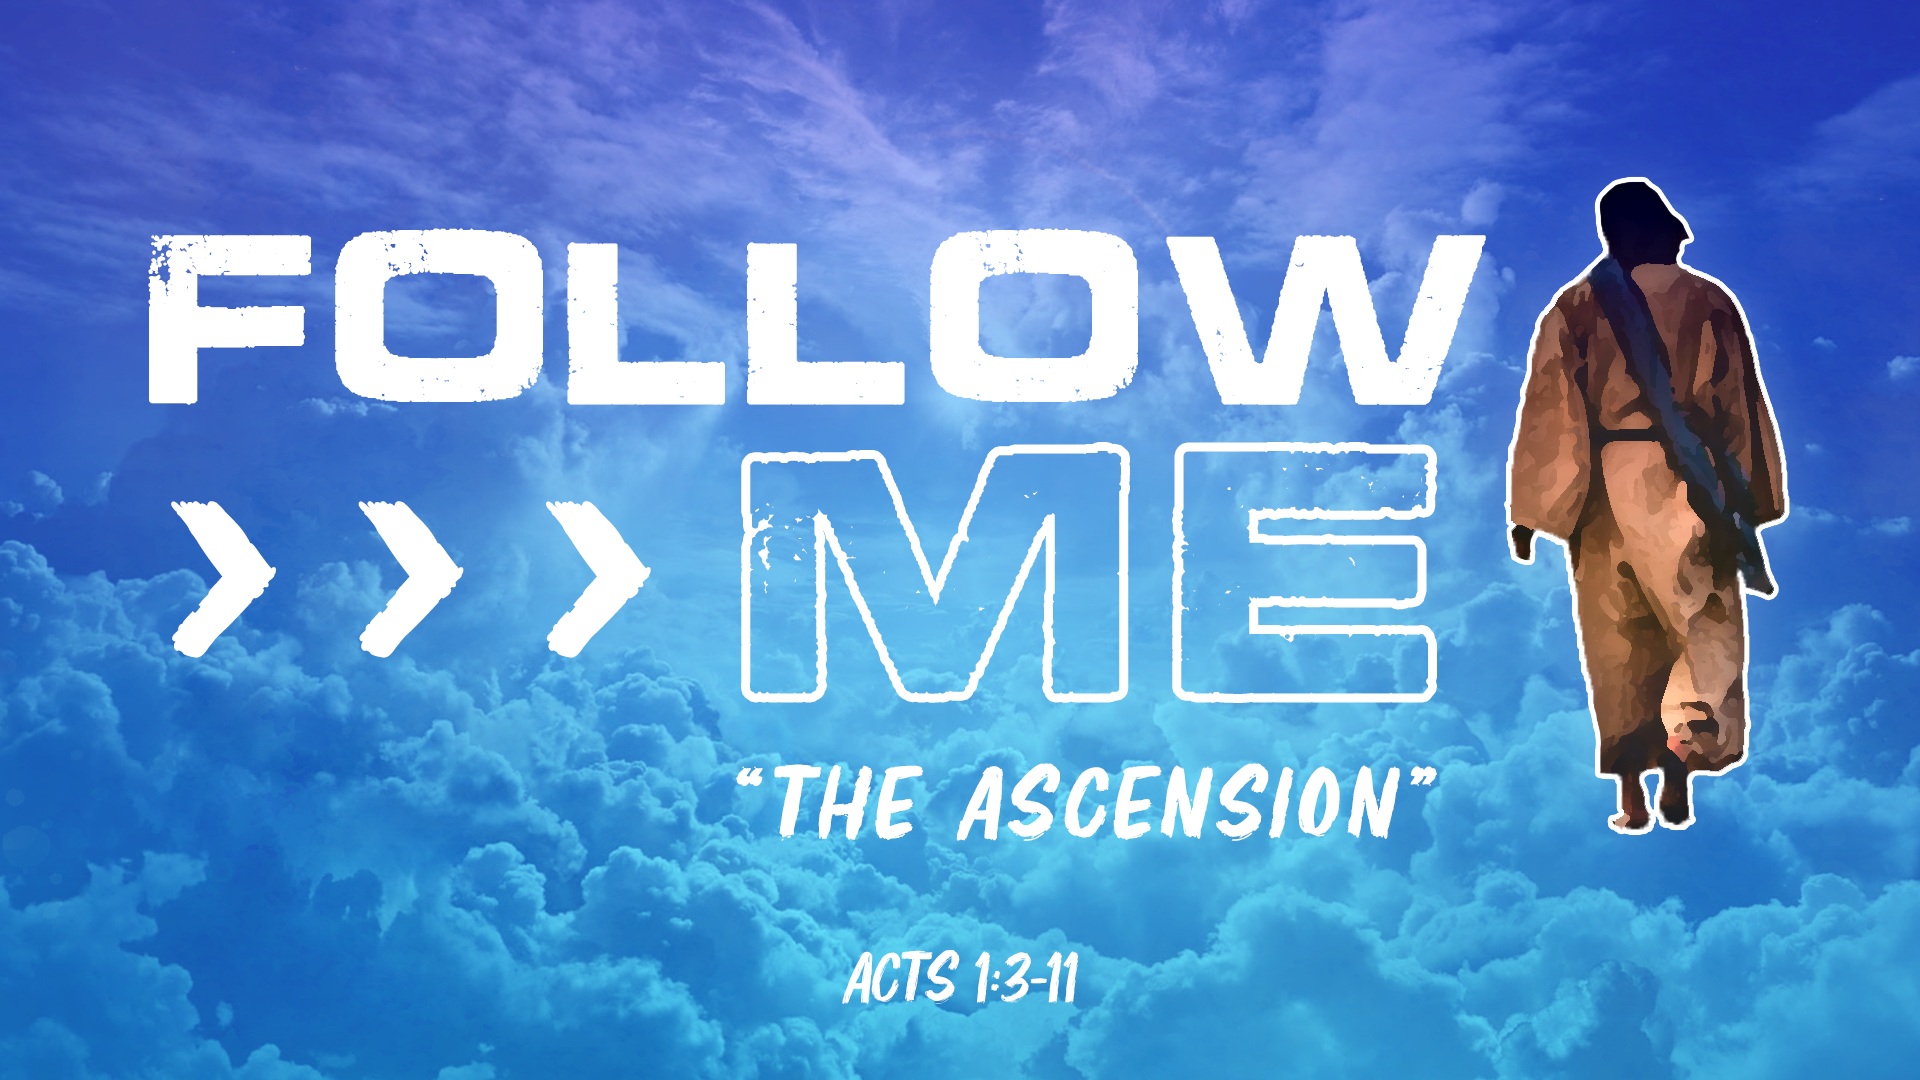 The Ascension (Follow Me series #15)